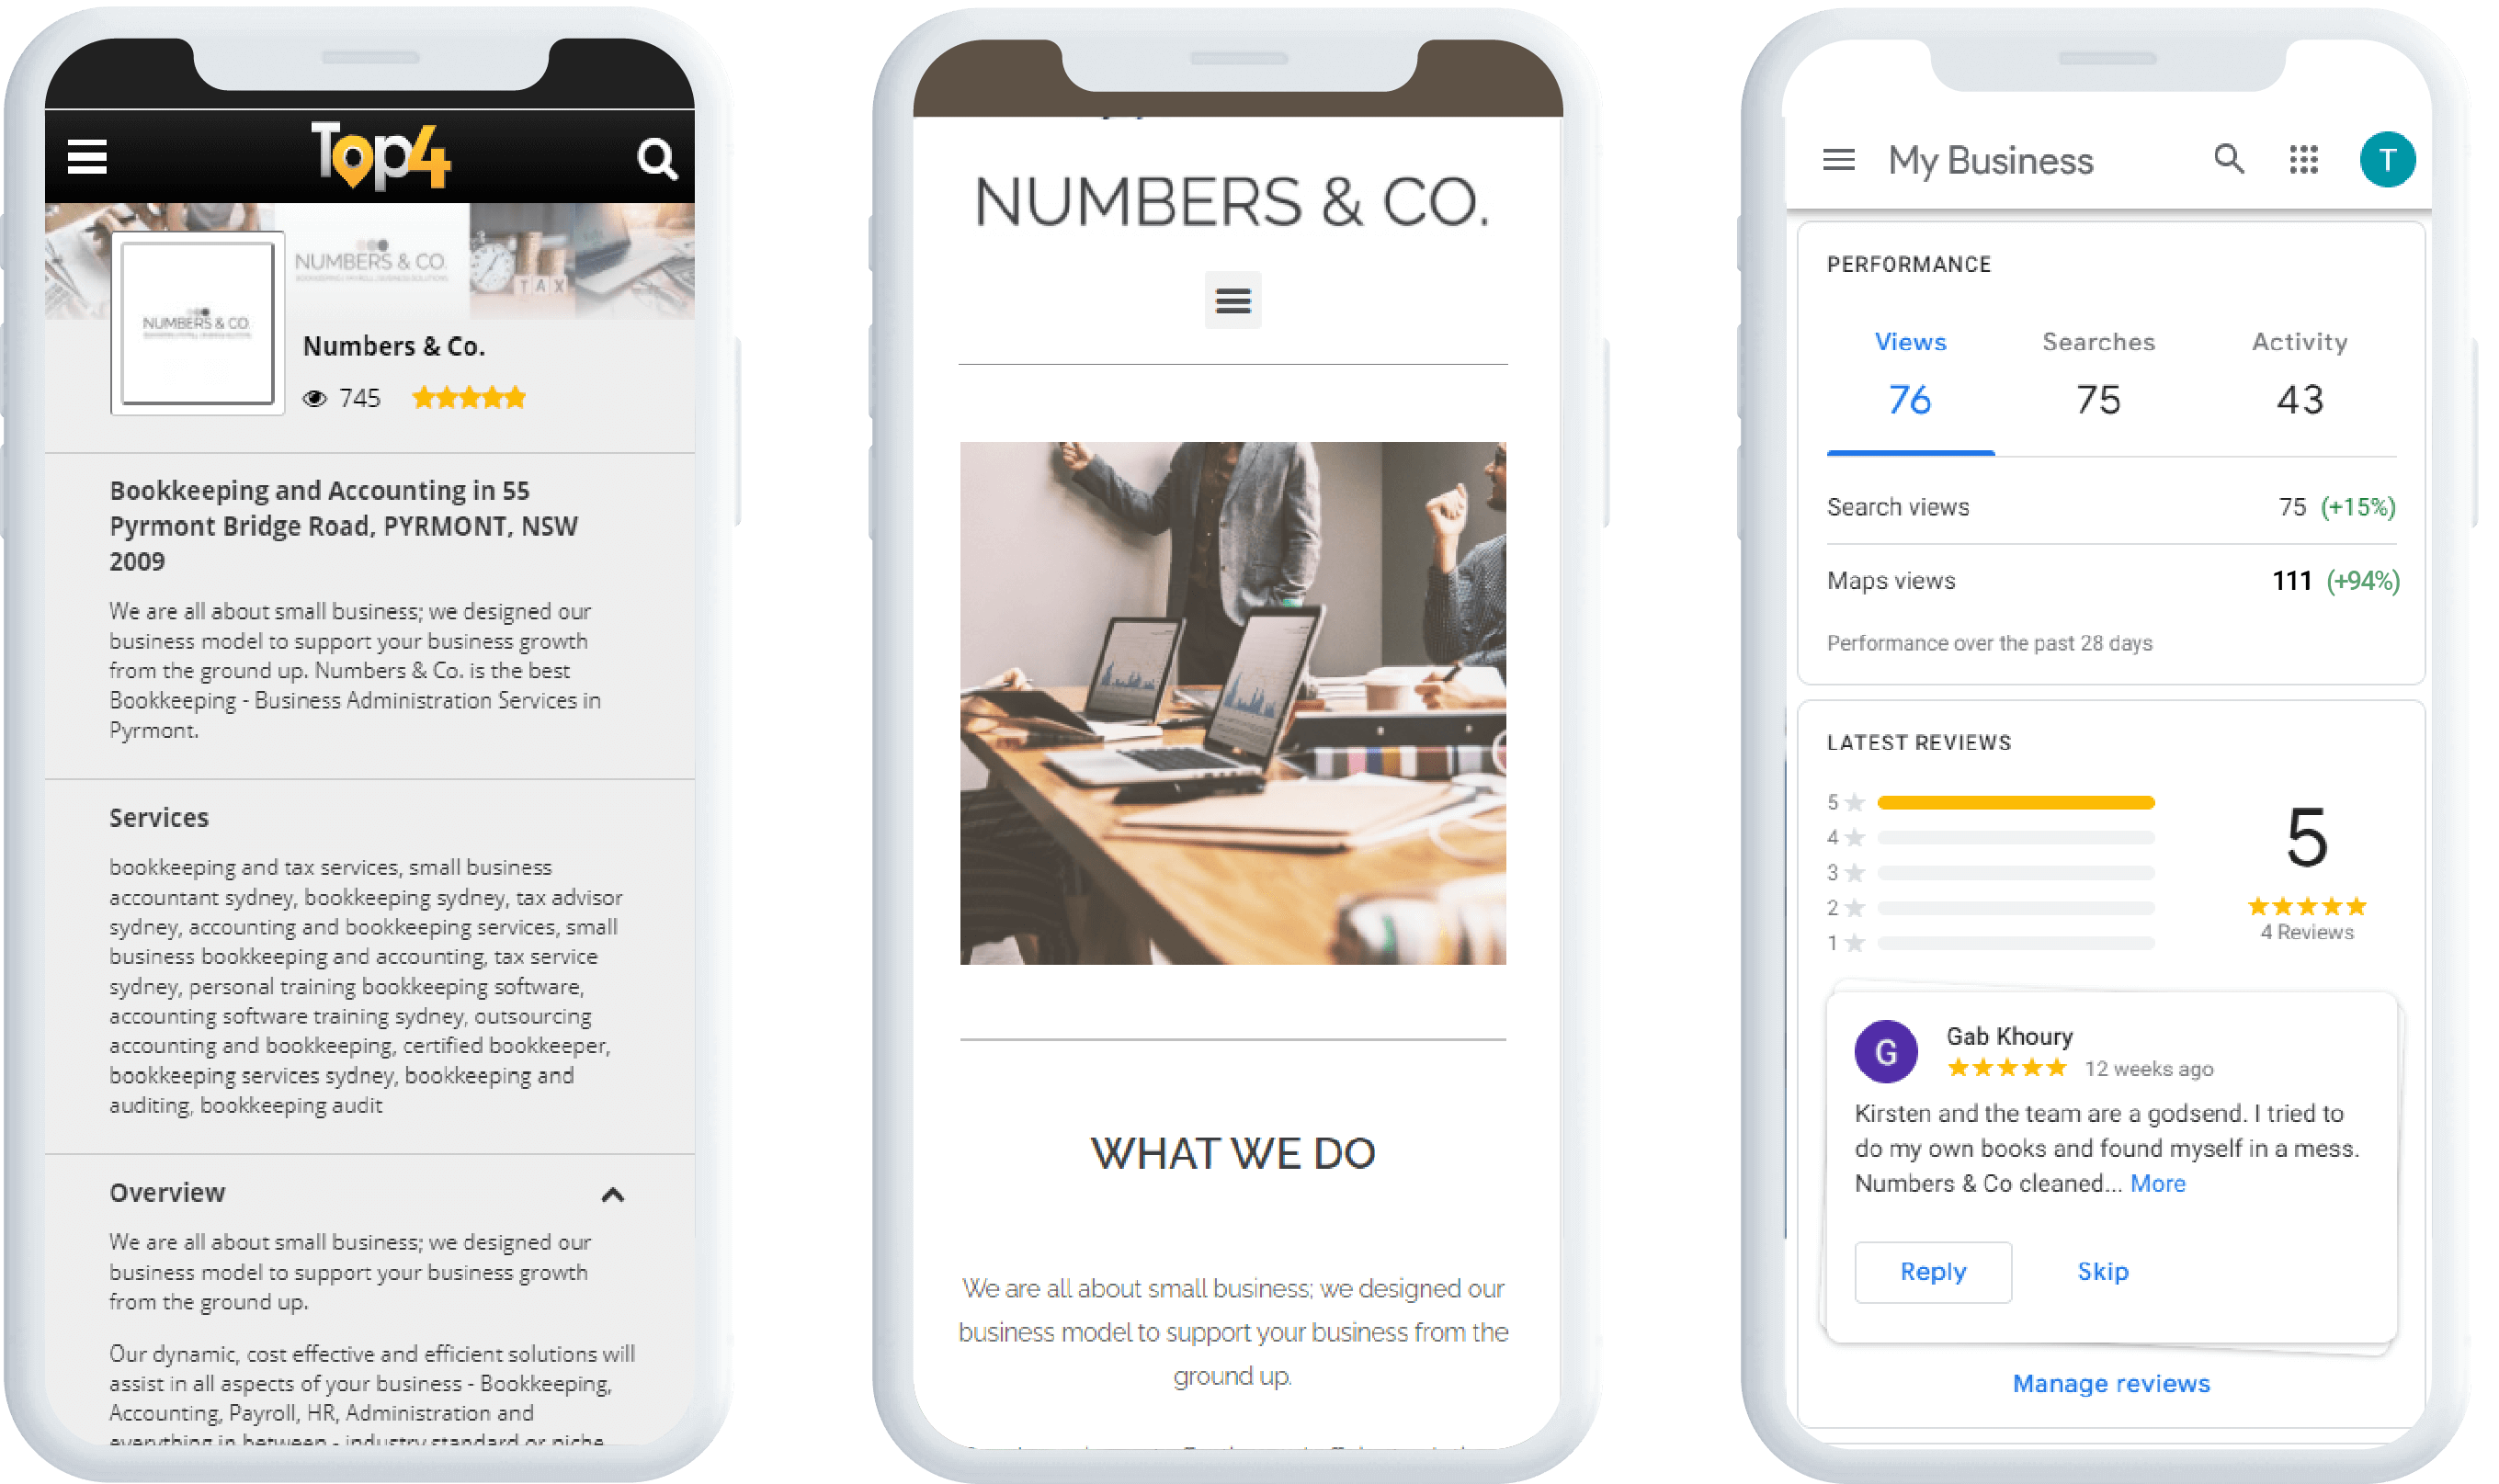 Numbers & Co. - Digital Marketing Case Study - Top4 Marketing